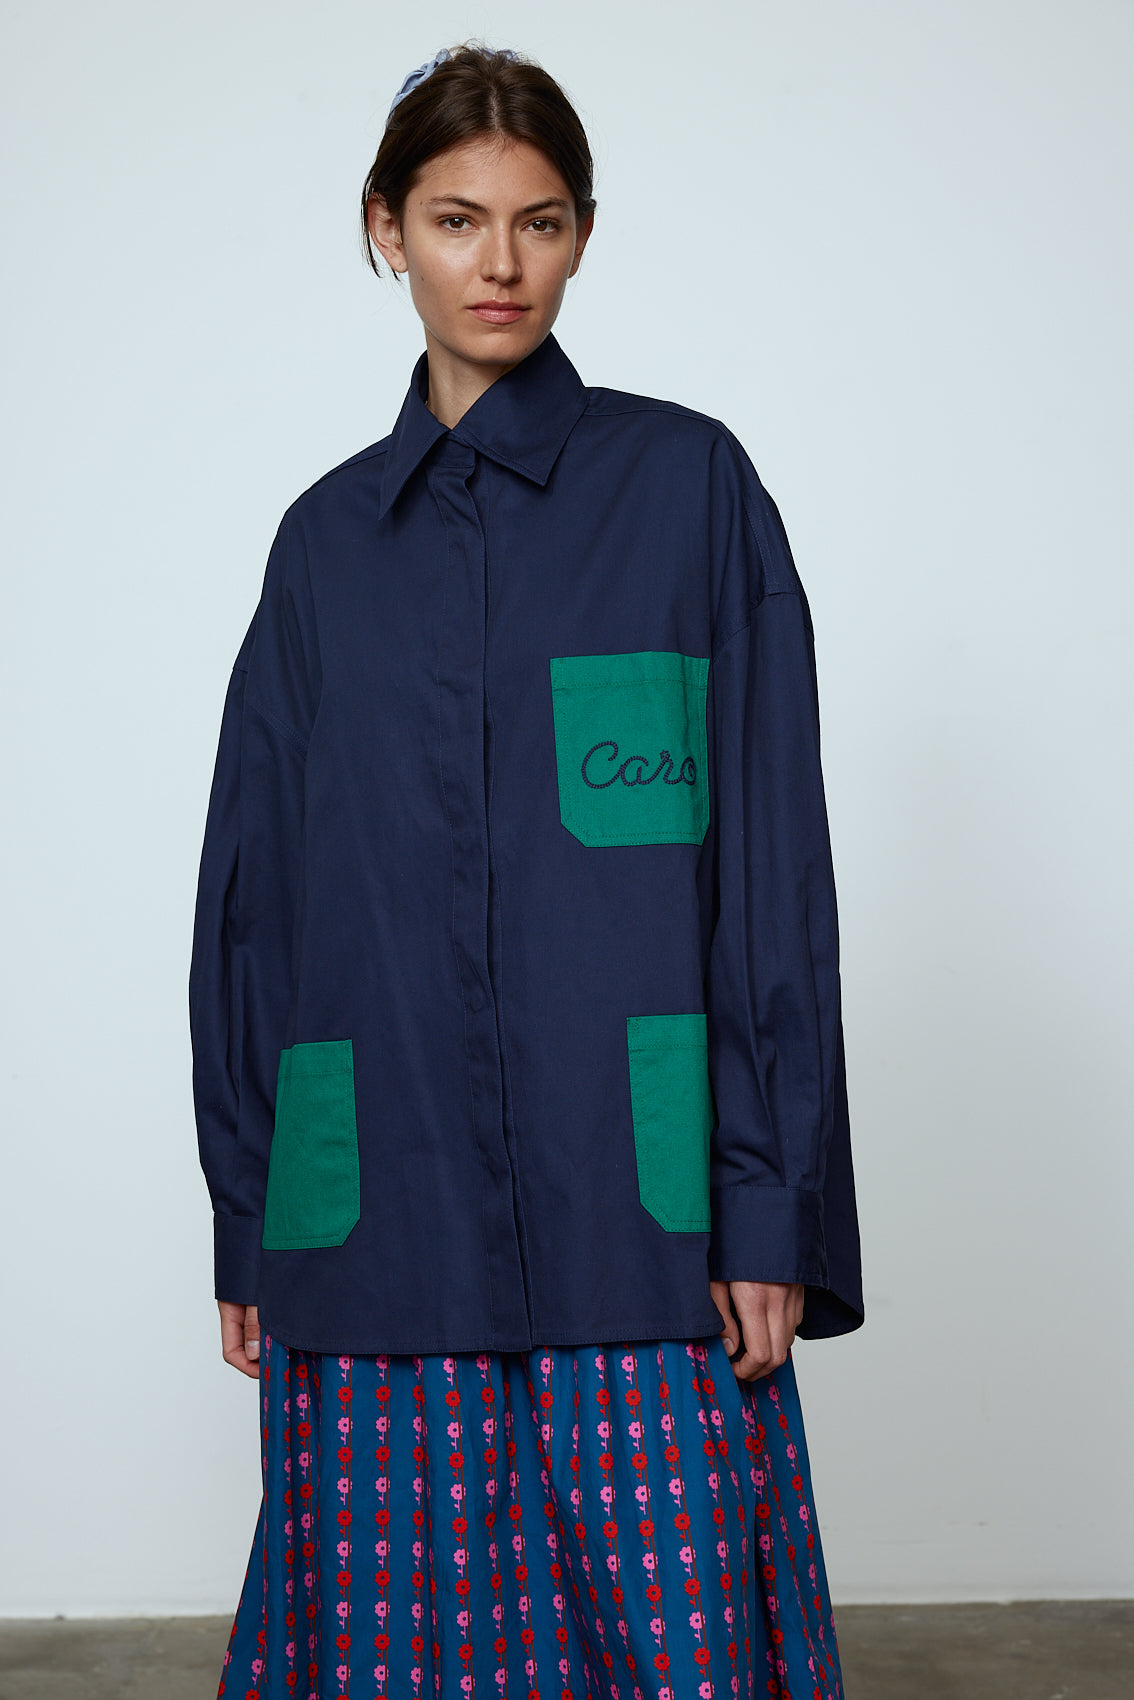 The Frederik Shirt is an oversized cotton style with big sleeves, green pockets, and an embroidered Caro logo on the front.  Style it open over a dress, tank top, or t-shirt or buttoned up on its own.  Material: 100% cotton.  The model is 179cm (5'10") and wears size S. Frederik Bille Brahe.